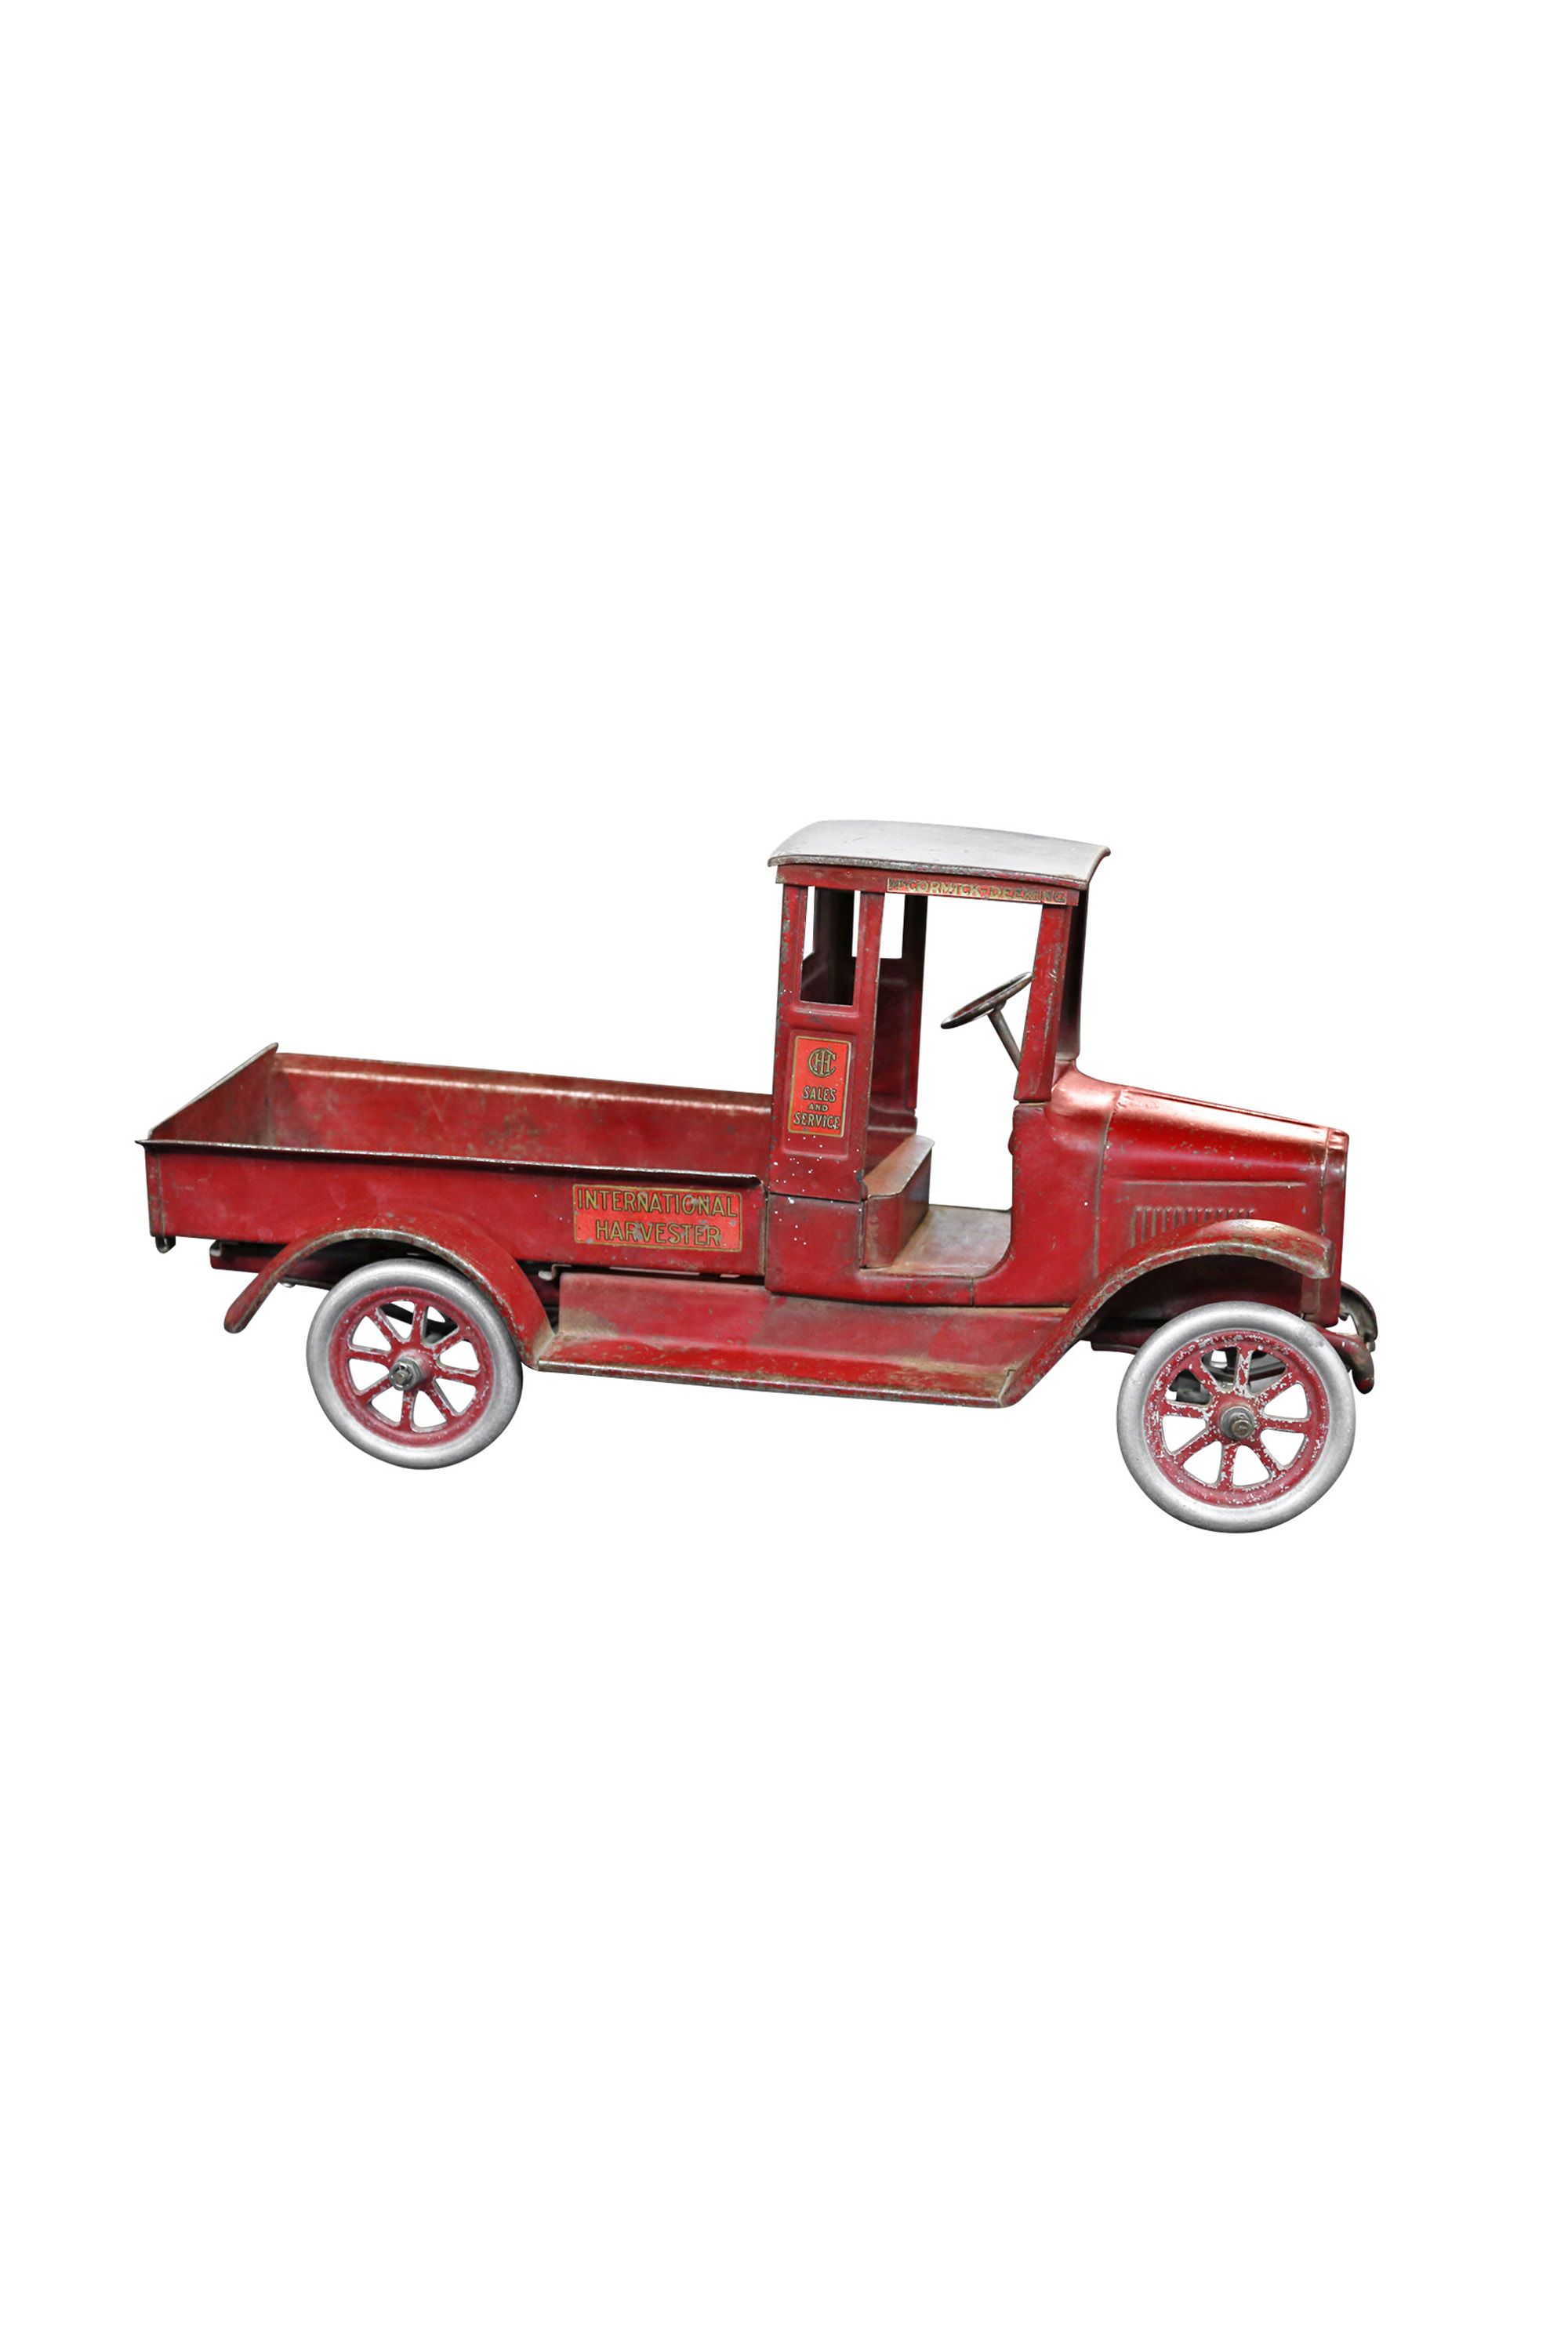 Vintage Toy Truck Manufacturers | Wow Blog